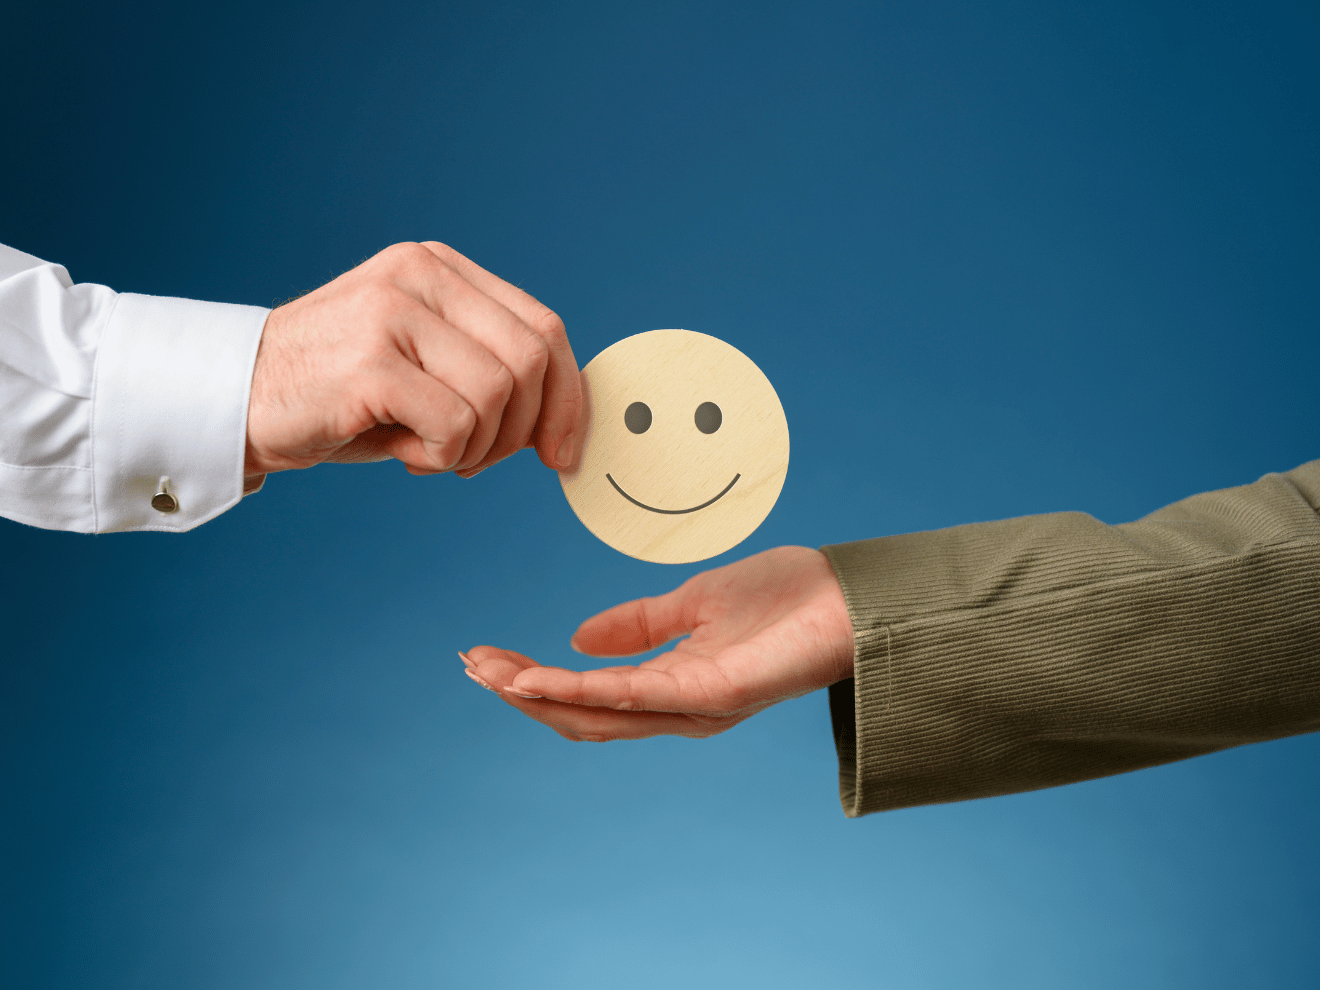 How to use positive language to address customer concerns